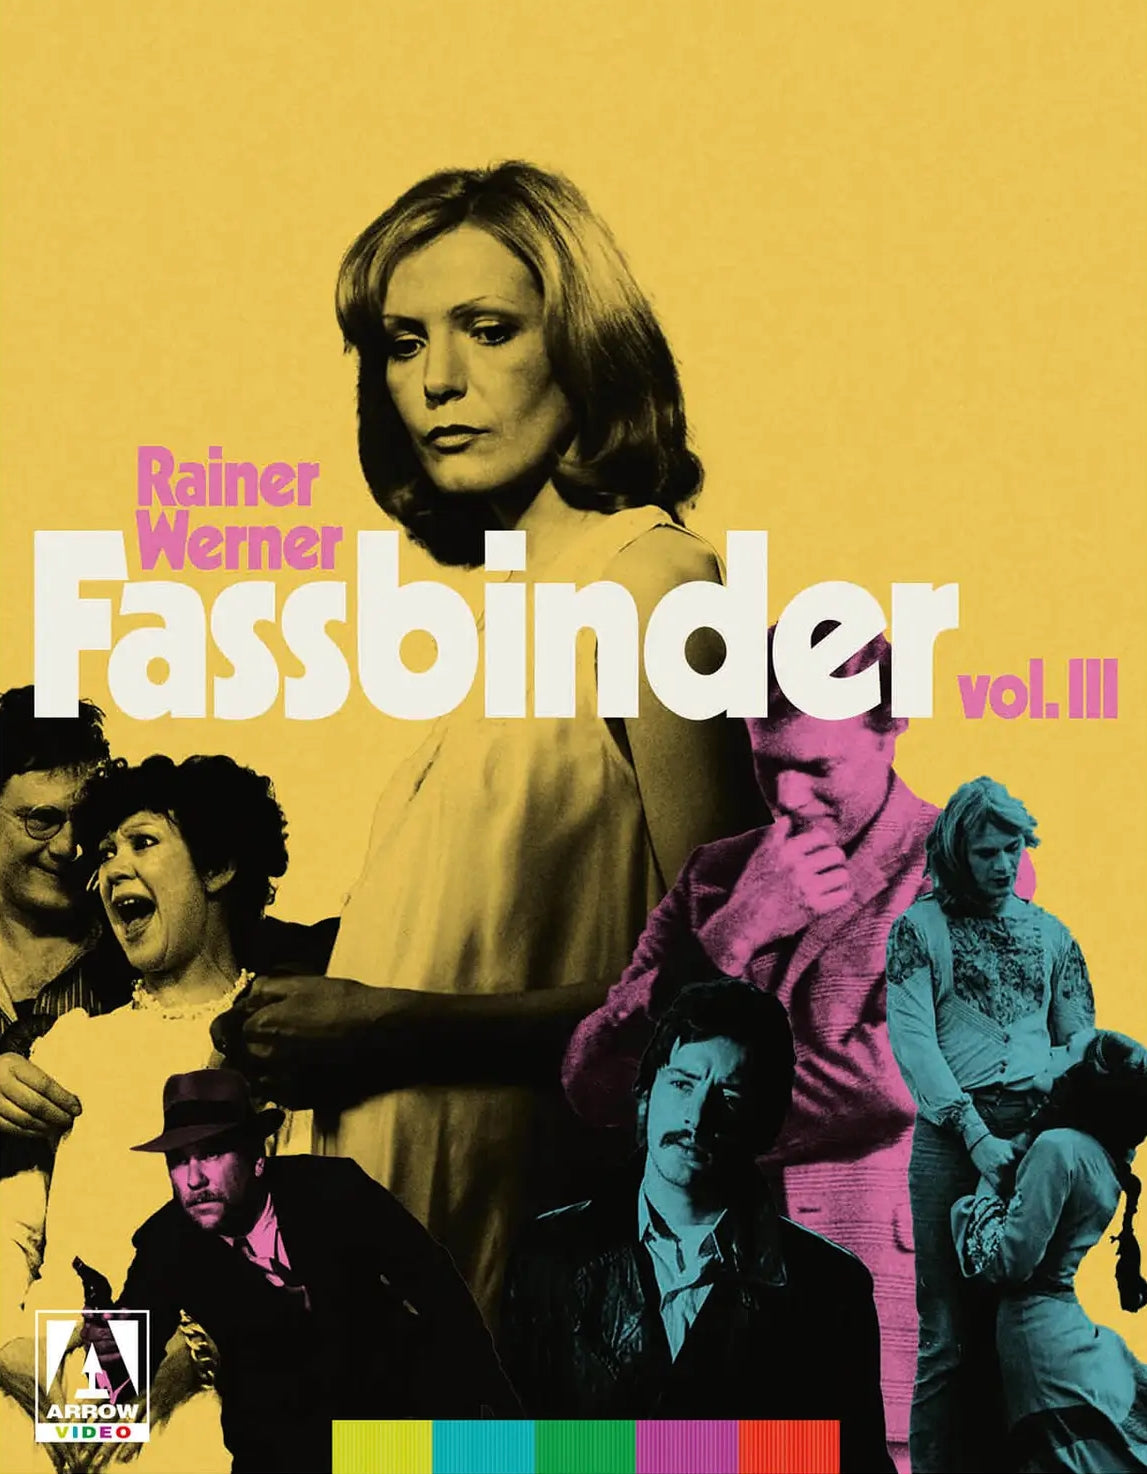 THE RAINER WERNER FASSBINDER COLLECTION VOLUME III (REGION B IMPORT - LIMITED EDITION) BLU-RAY